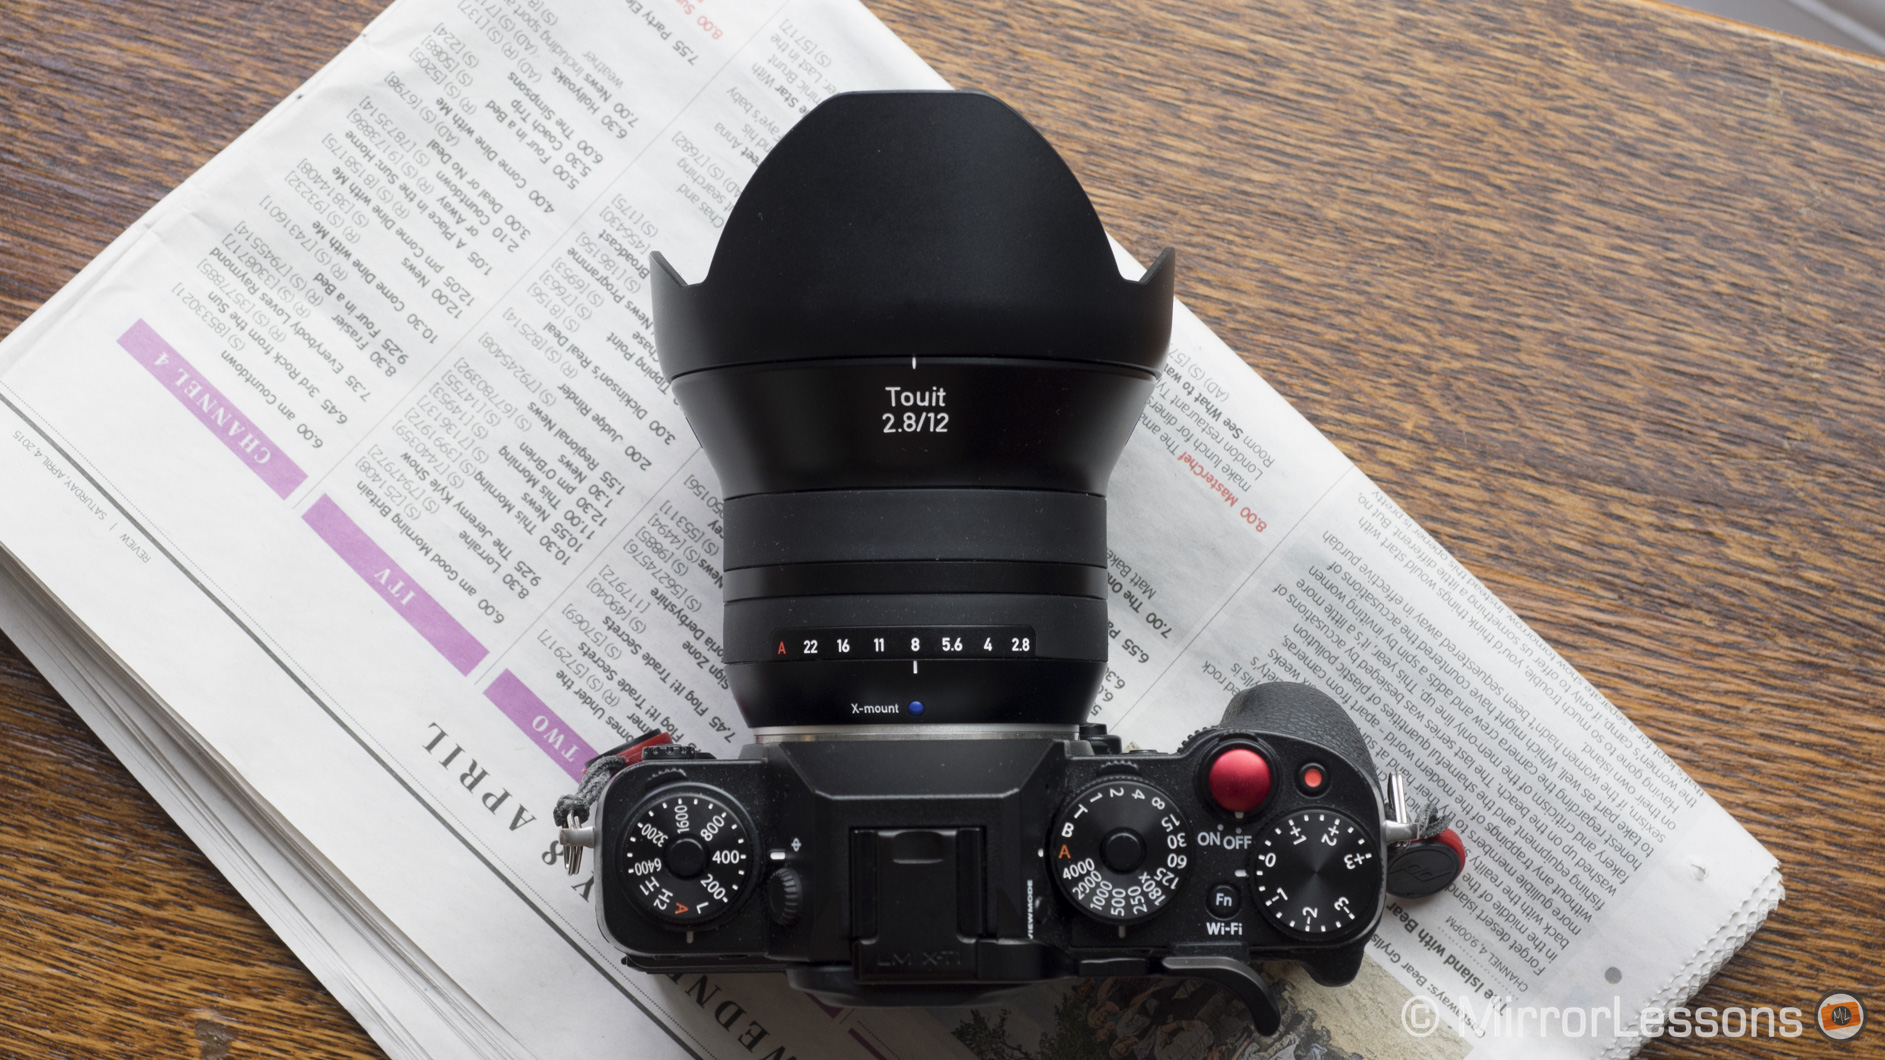 The Tale of Two Touits – Part I – Zeiss Touit 12mm Review